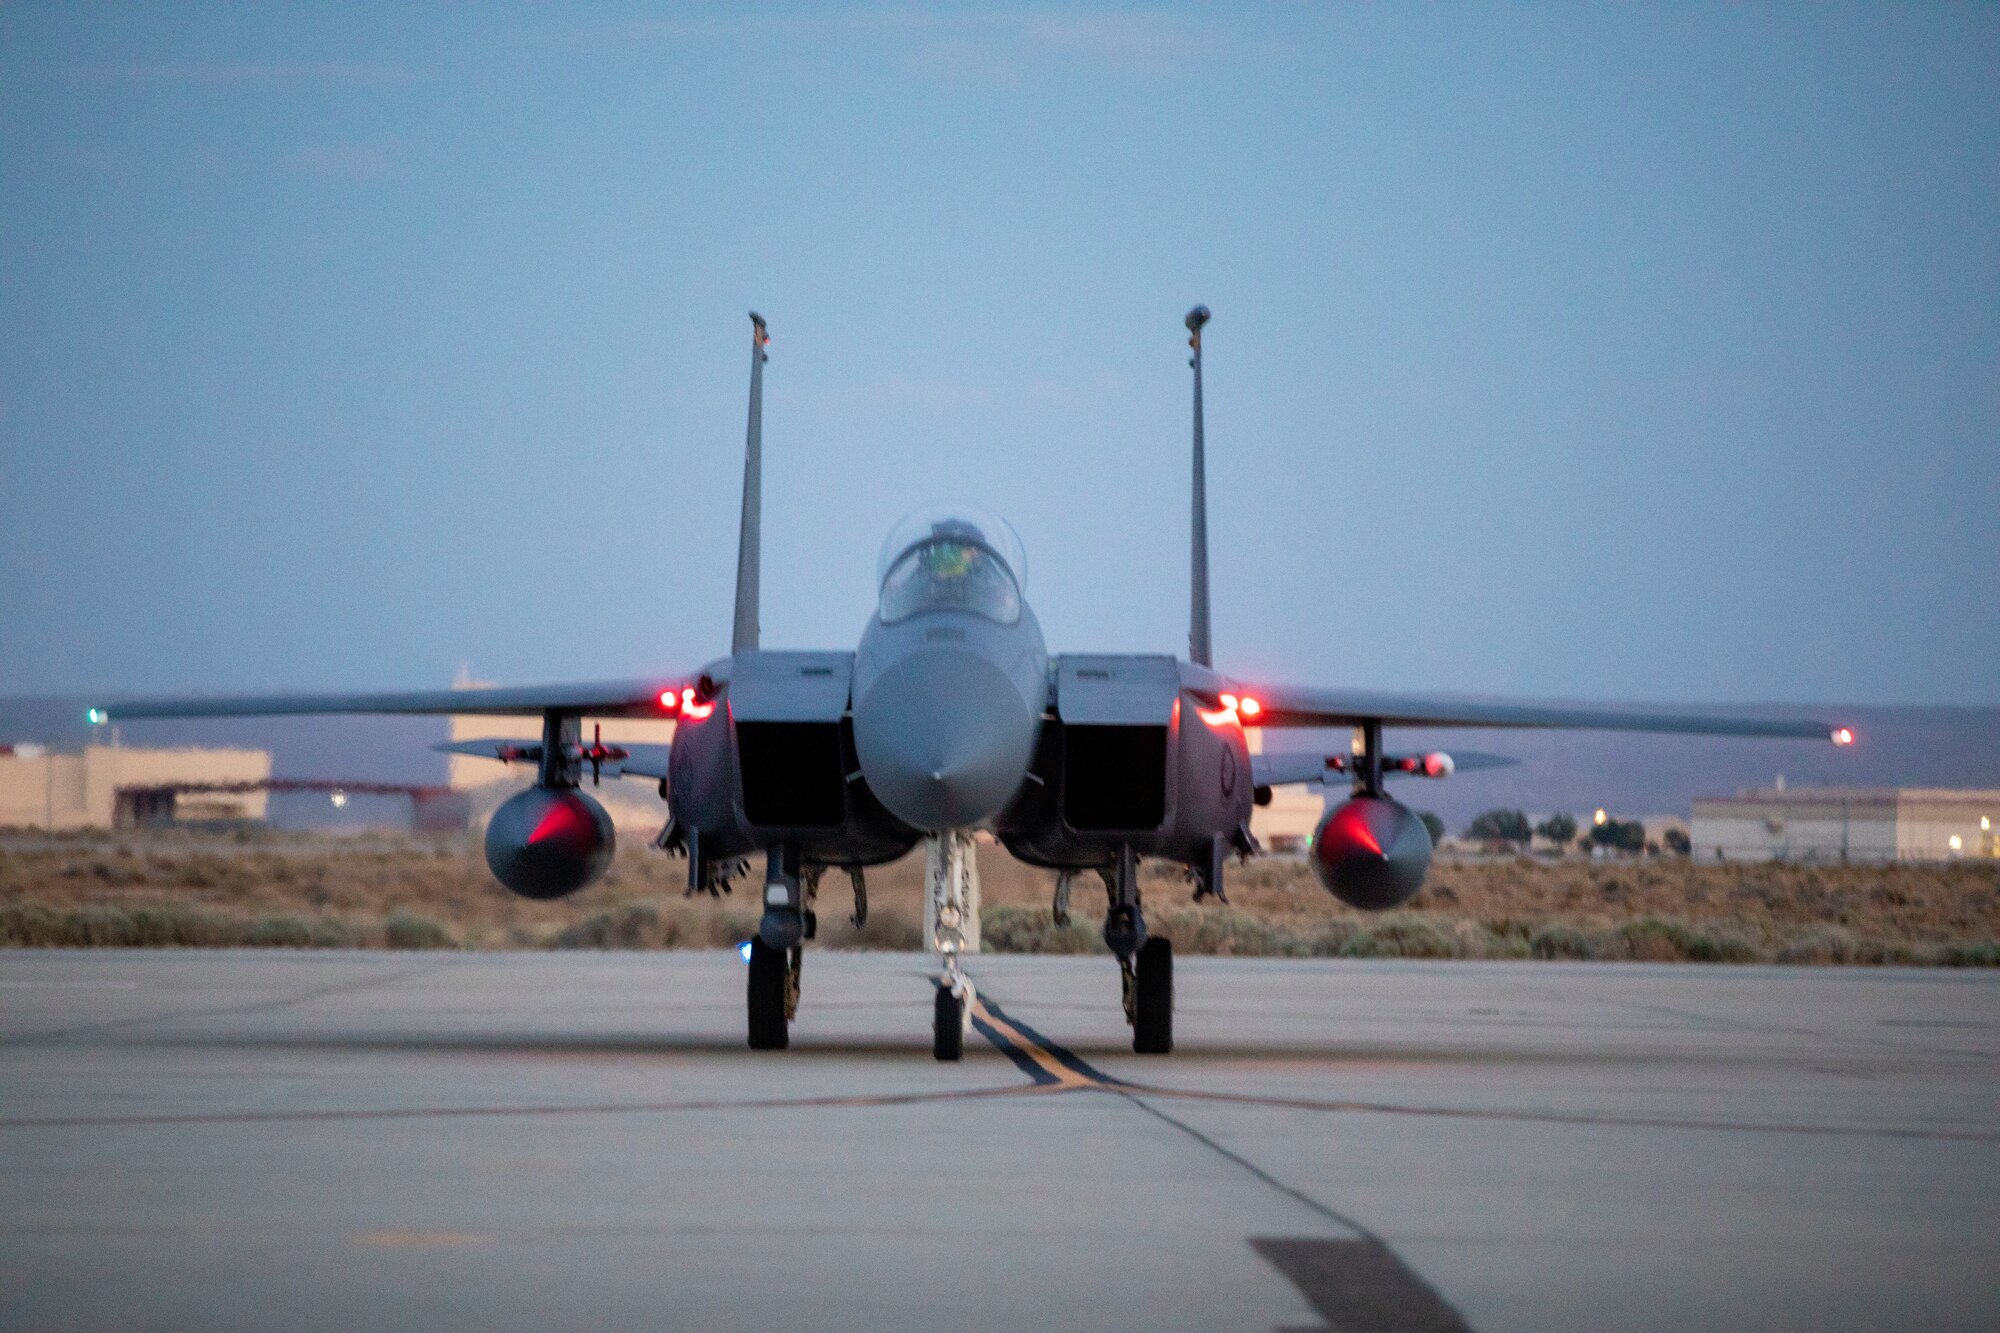 A F-15 assigned to the U.S. Air Force Weapons School parks on the flightline at Edwards Air Force Base, California. The Weapons School trains tactical experts and leaders to control and exploit air, space and cyber on behalf of the joint force.